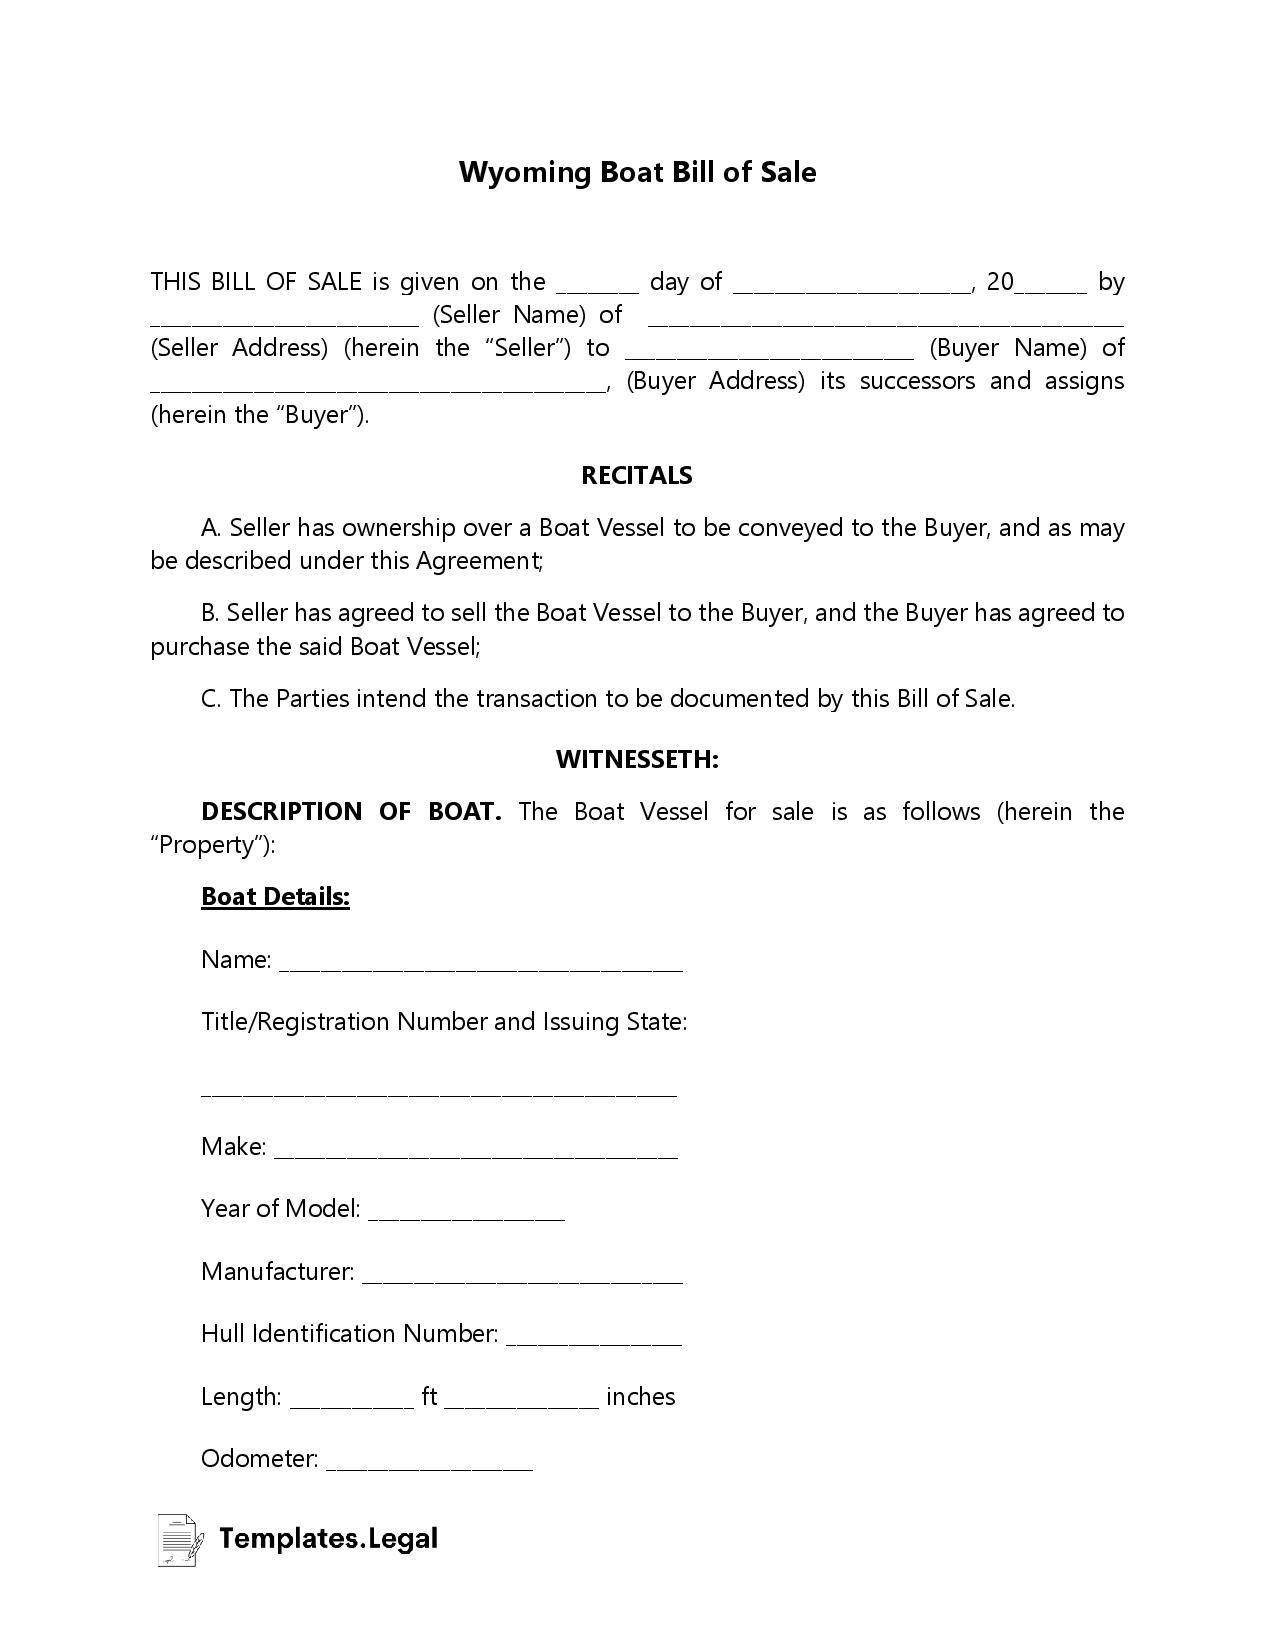 Wyoming Boat Bill of Sale - Templates.Legal